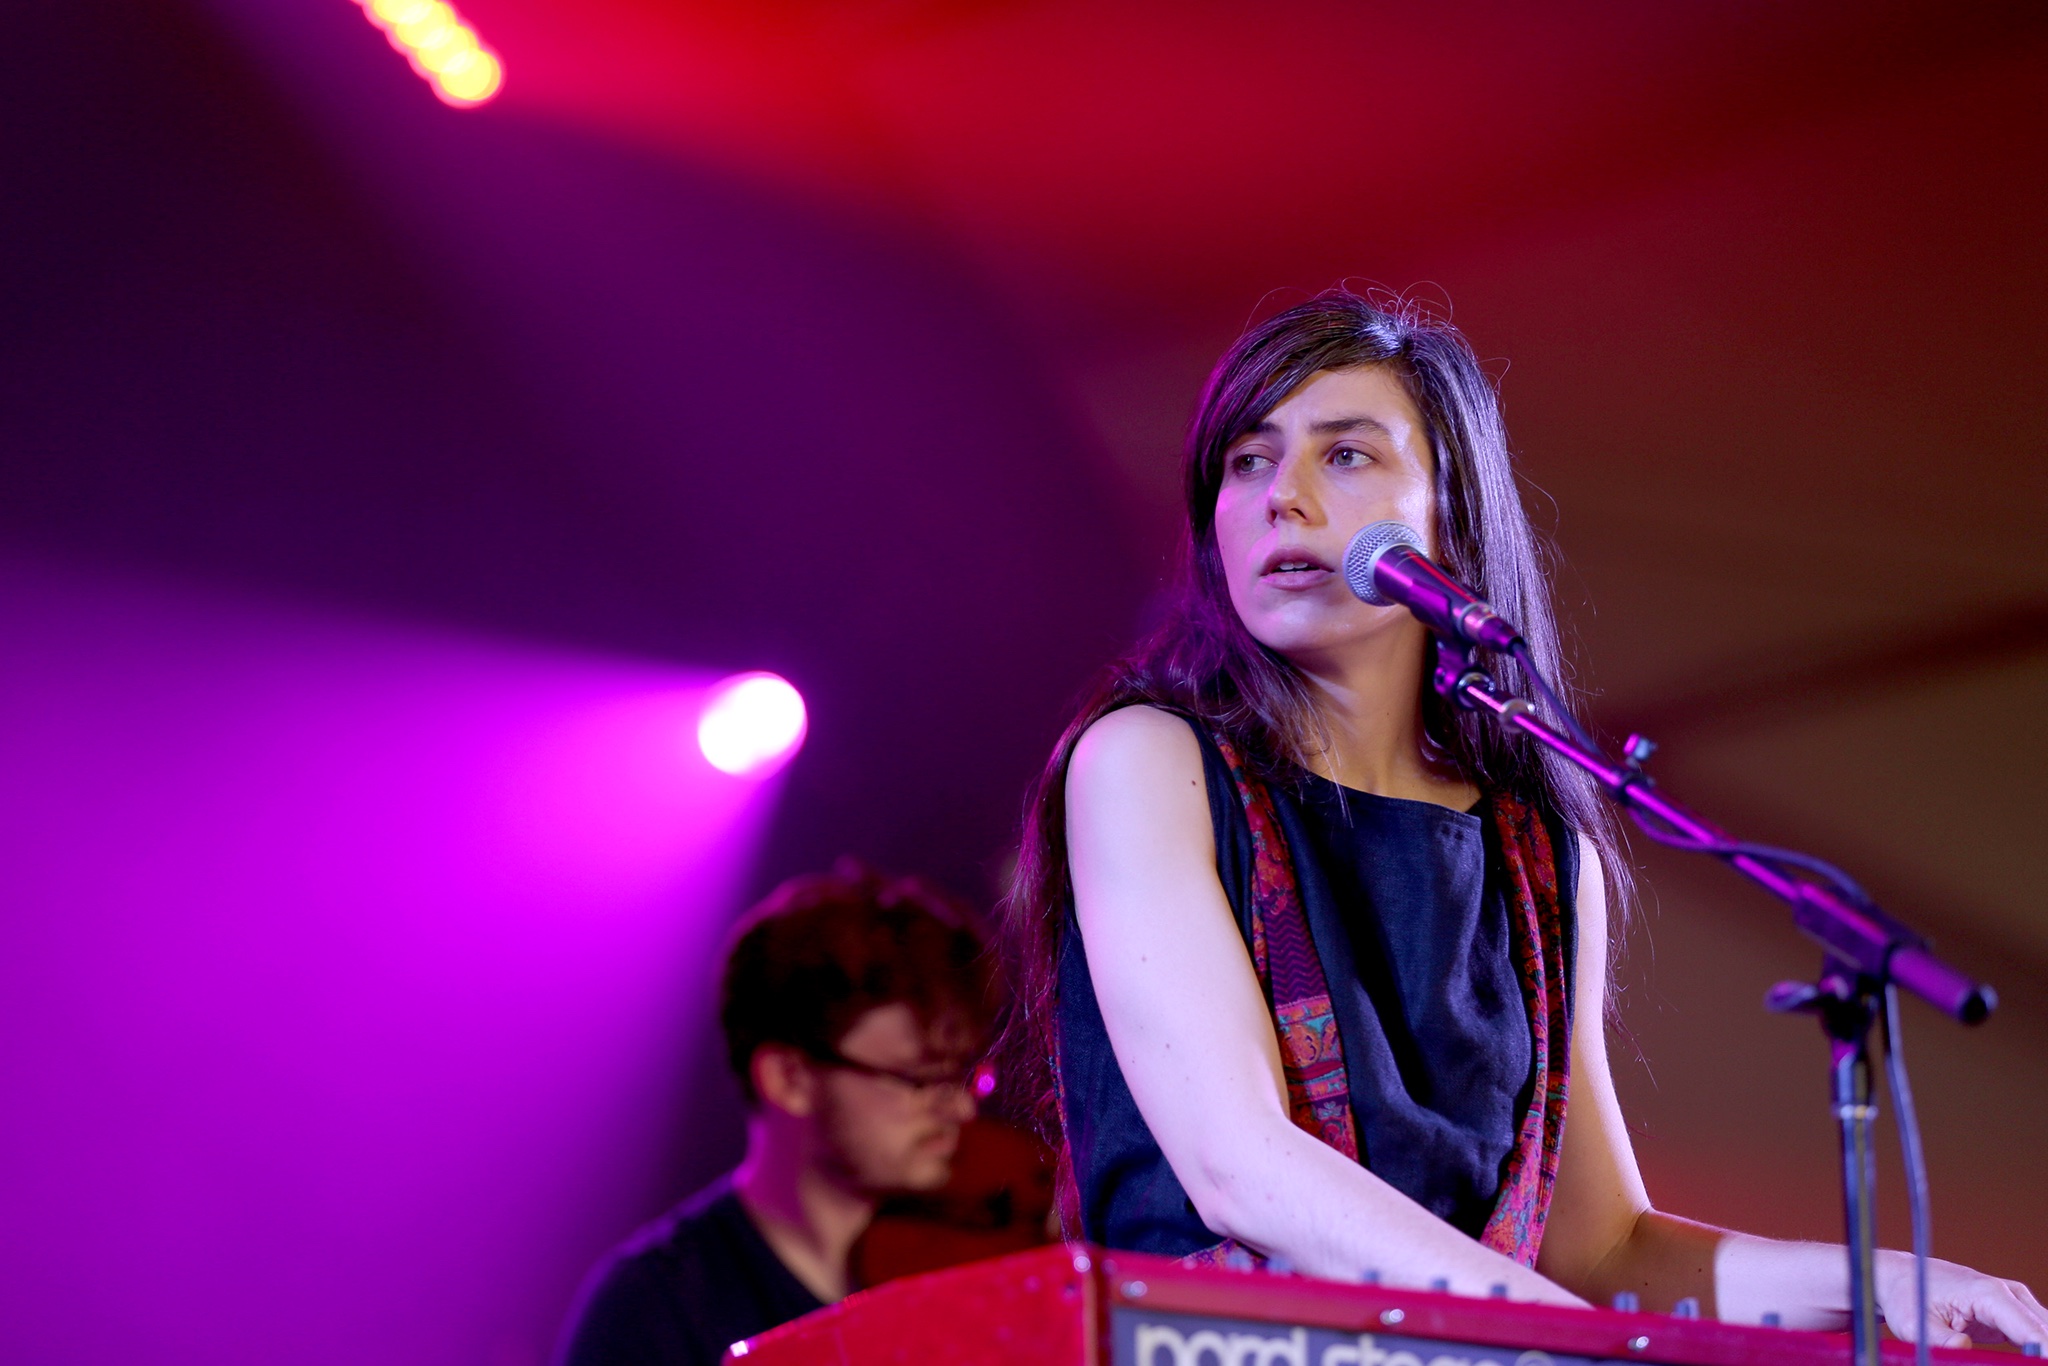 Julia Holter 8/28/16 @ Fuck Yeah Fest. Photo by Elli Papayanopolous for FYF Fest. Used With Permission By www.BlurredCulture.com.